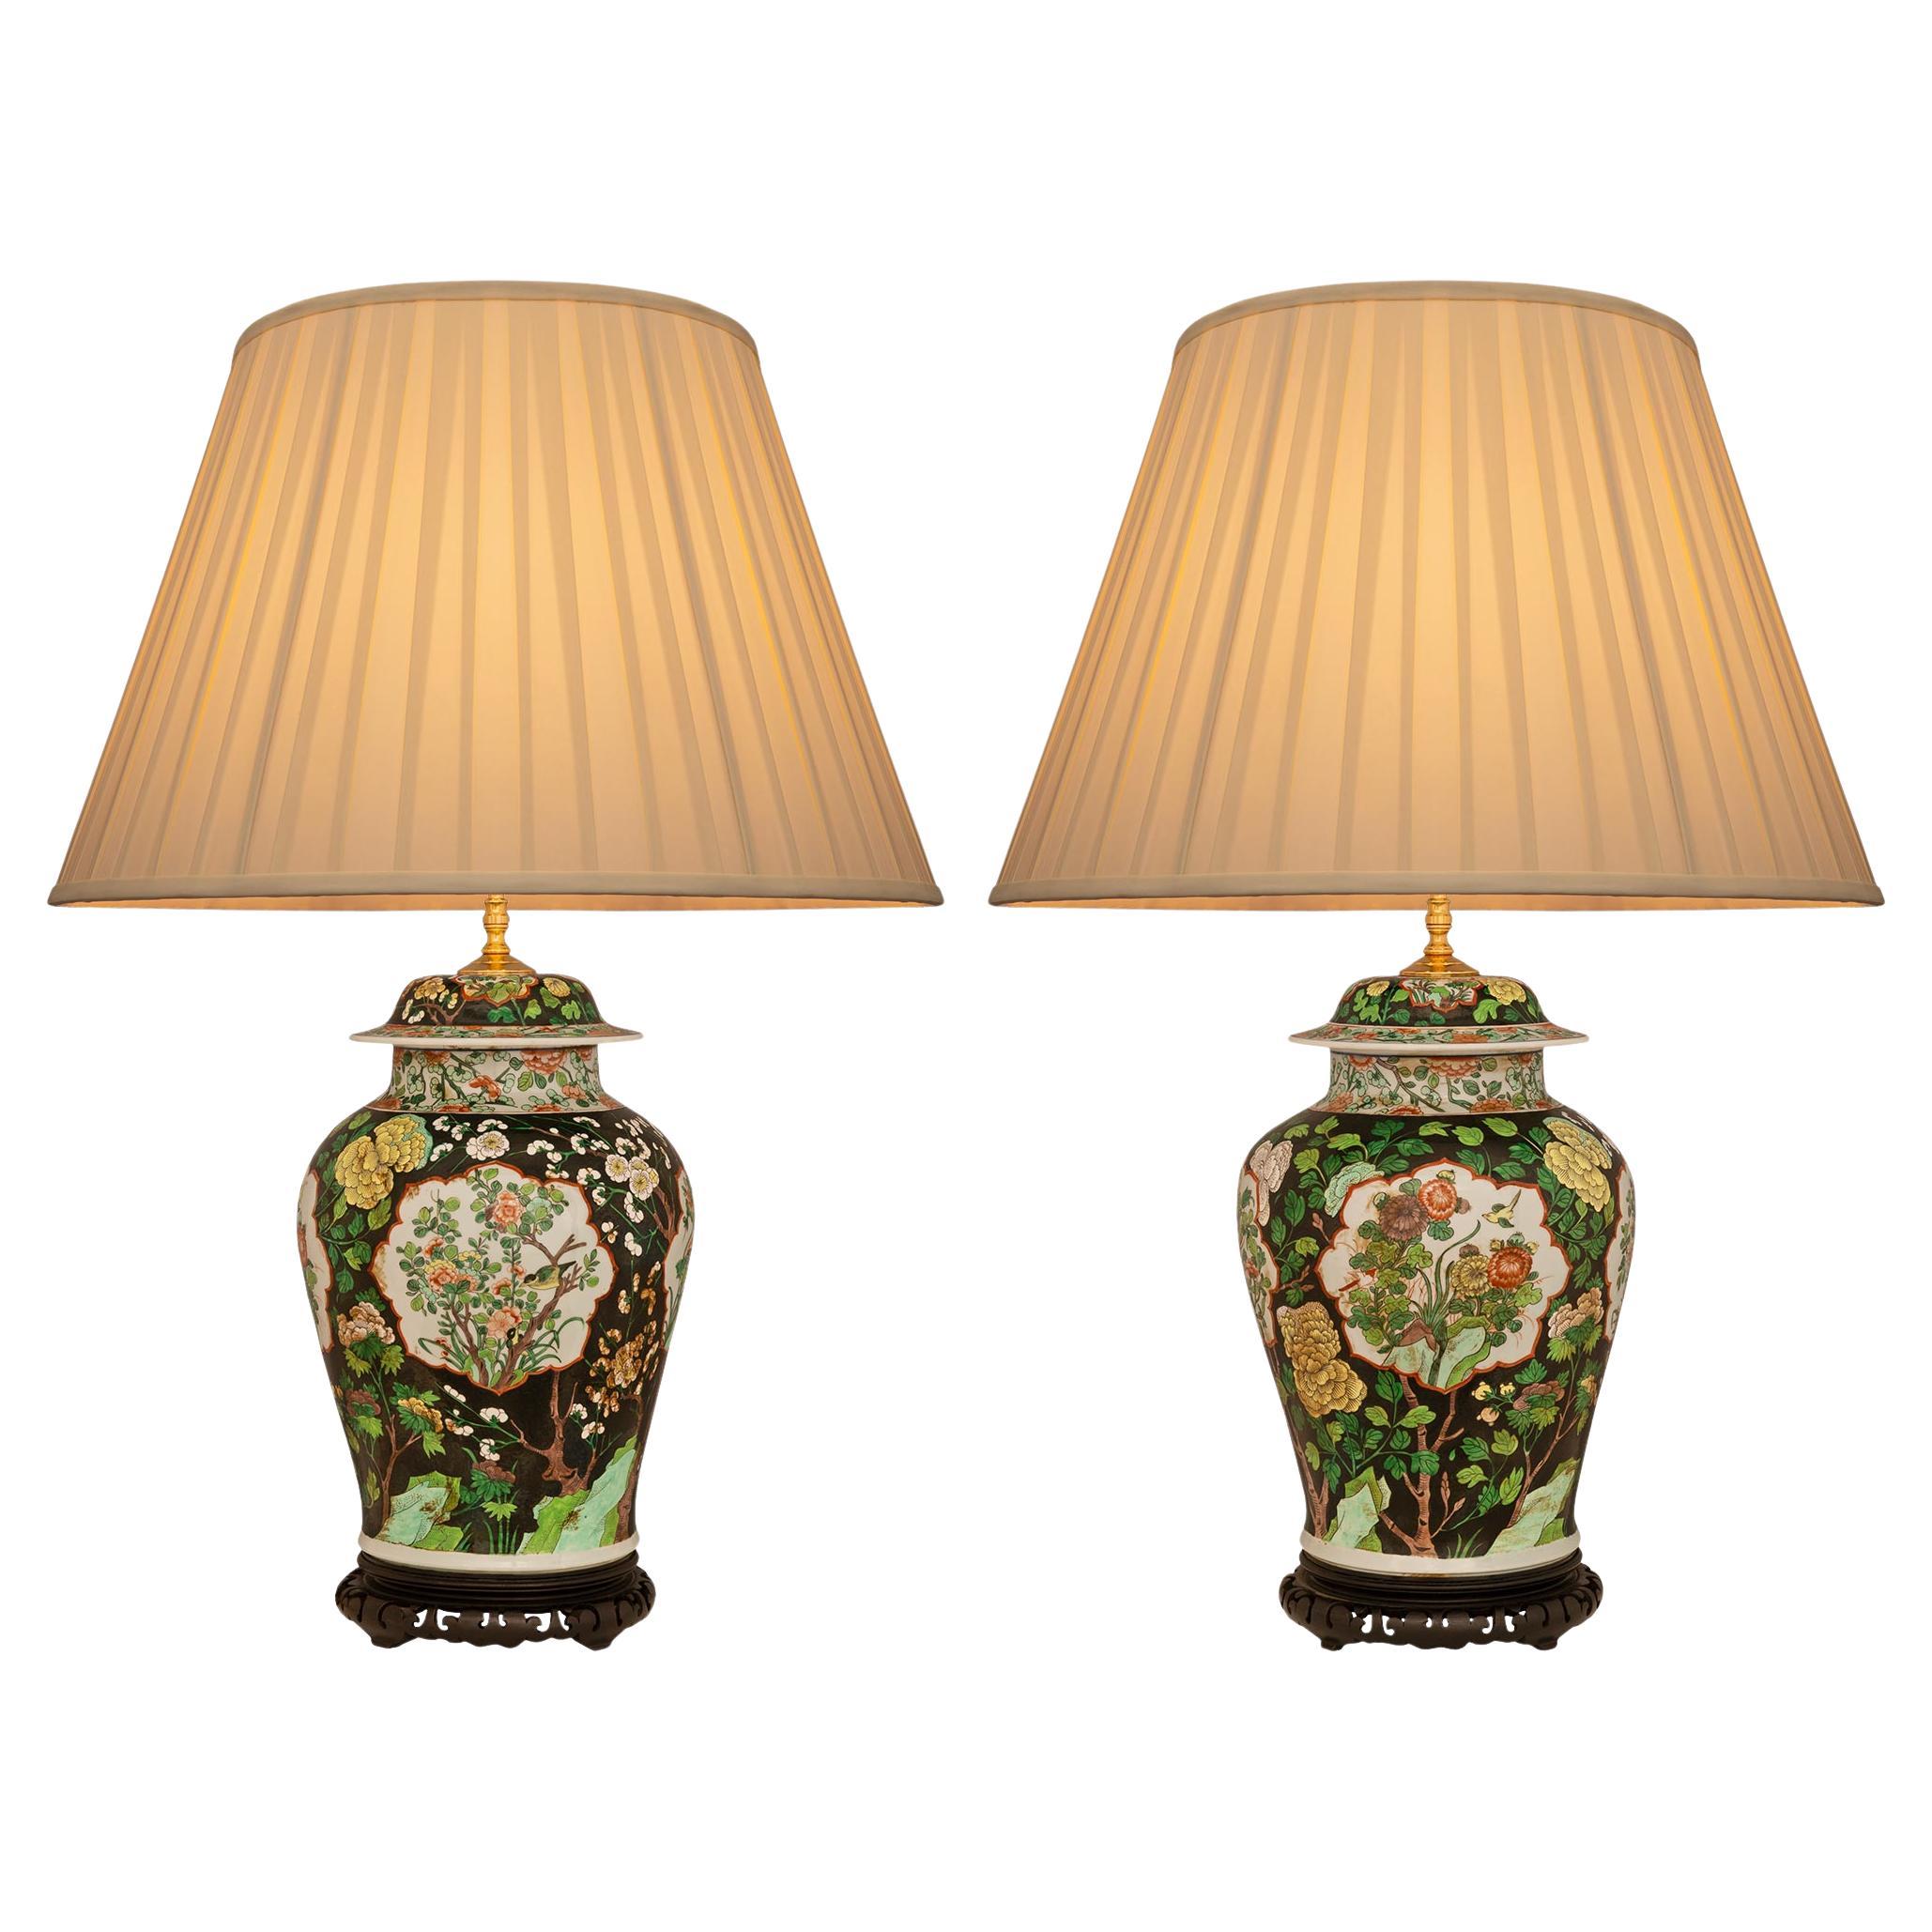 pair of Chinese 19th century Famille Verte Porcelain and patinated Wood lamps